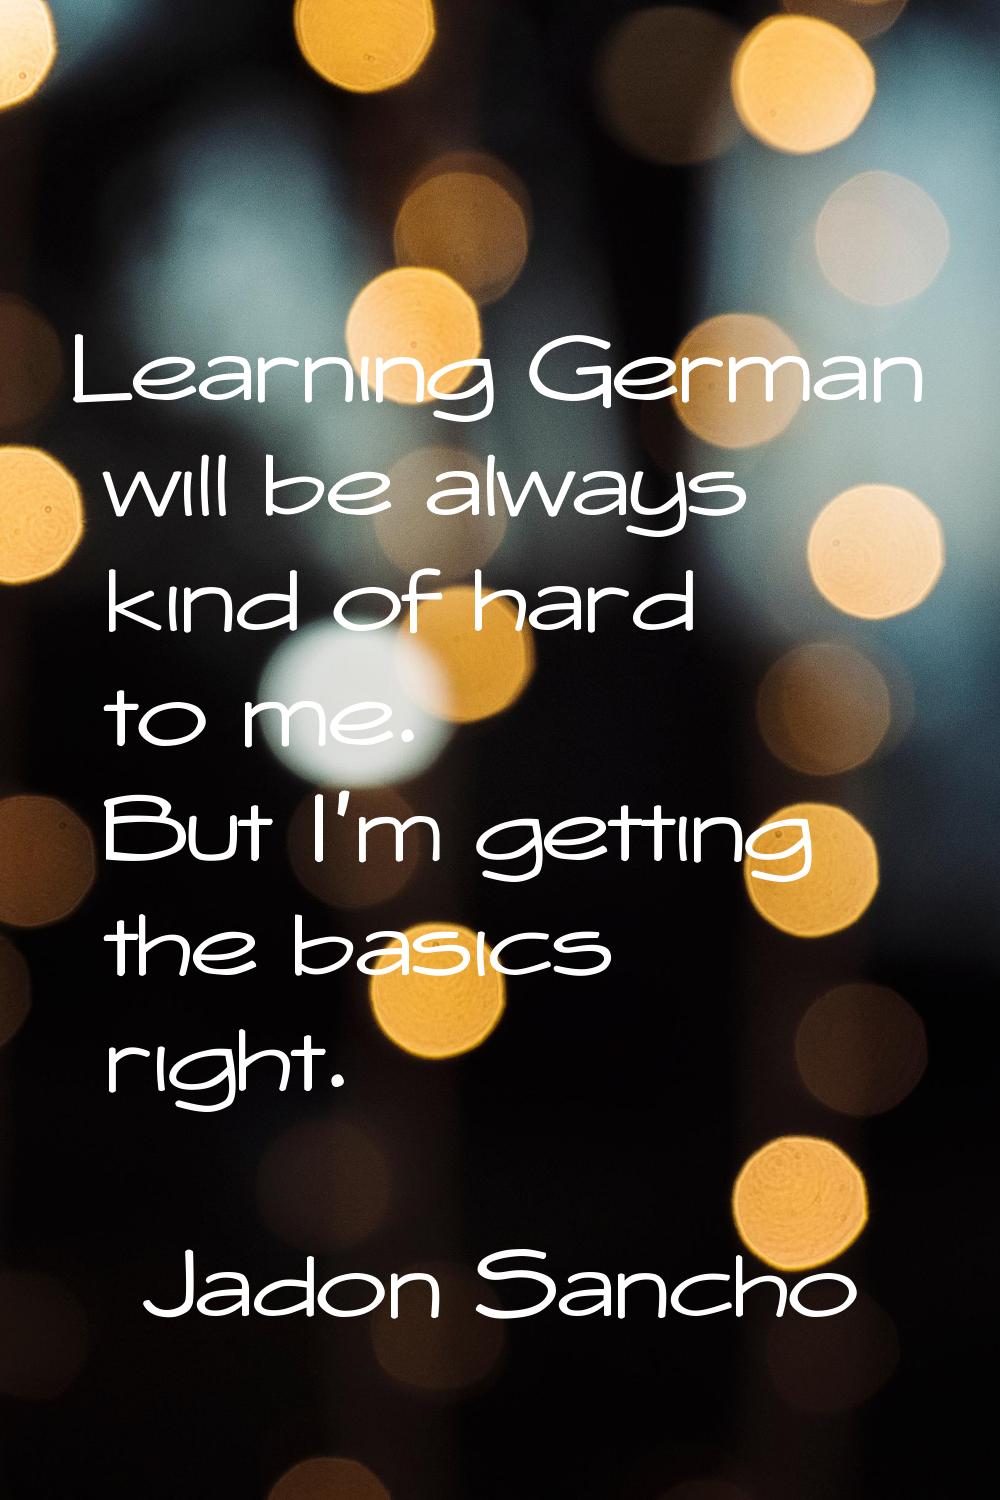 Learning German will be always kind of hard to me. But I'm getting the basics right.